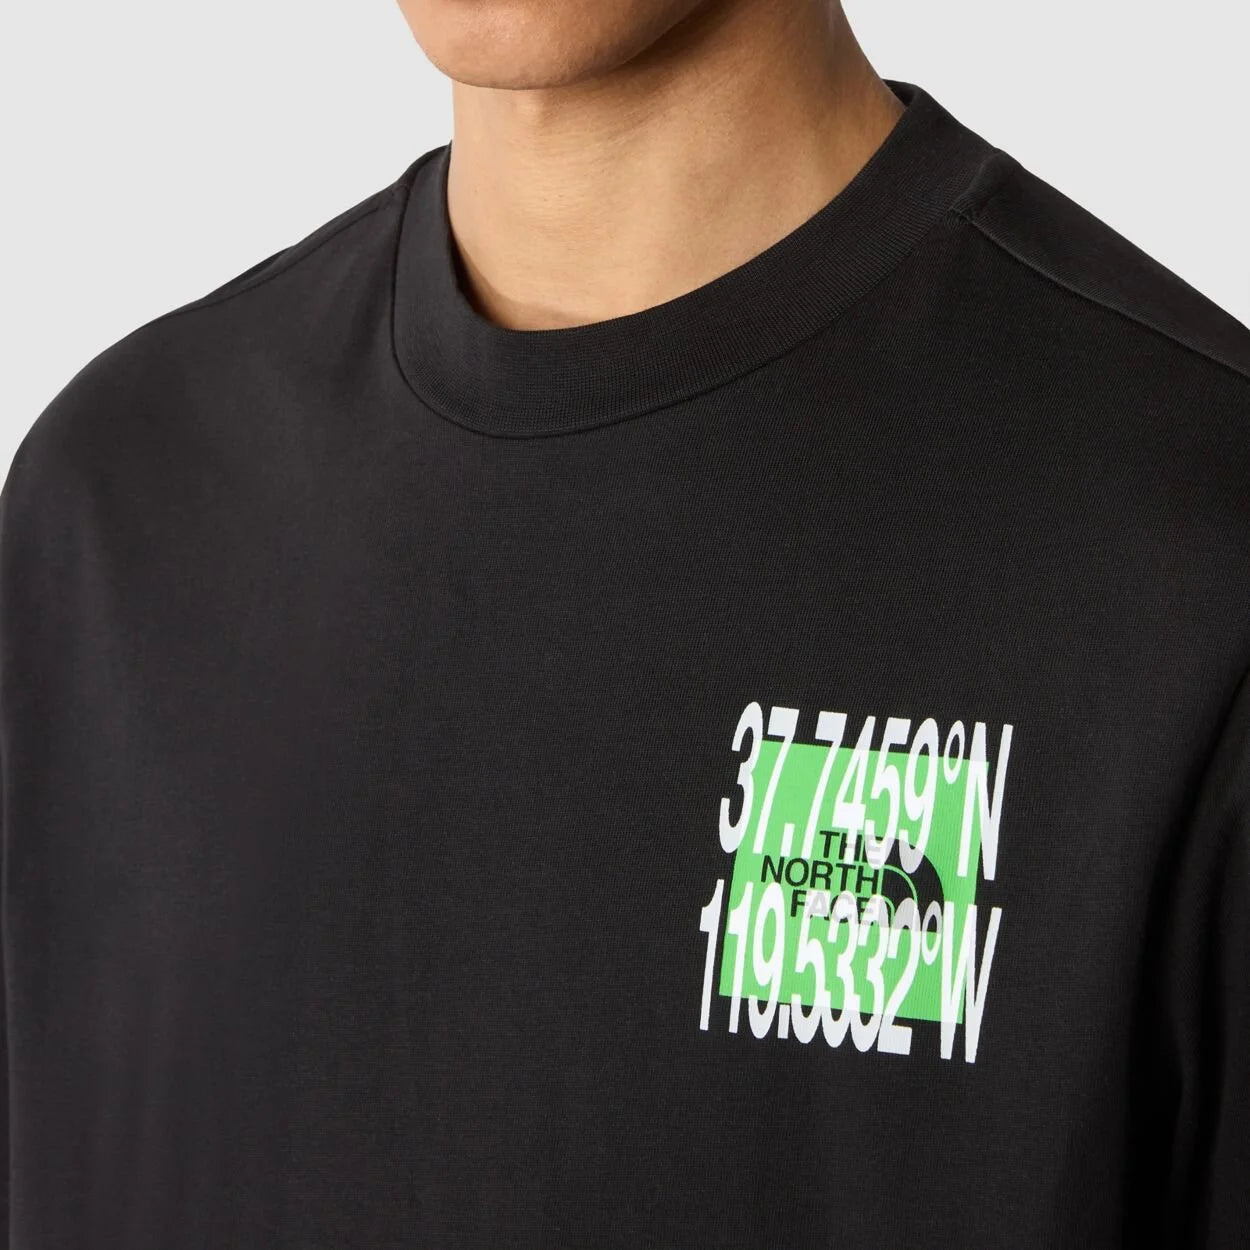 THE NORTHFACE GRAPHIC TEE - BOX FIT